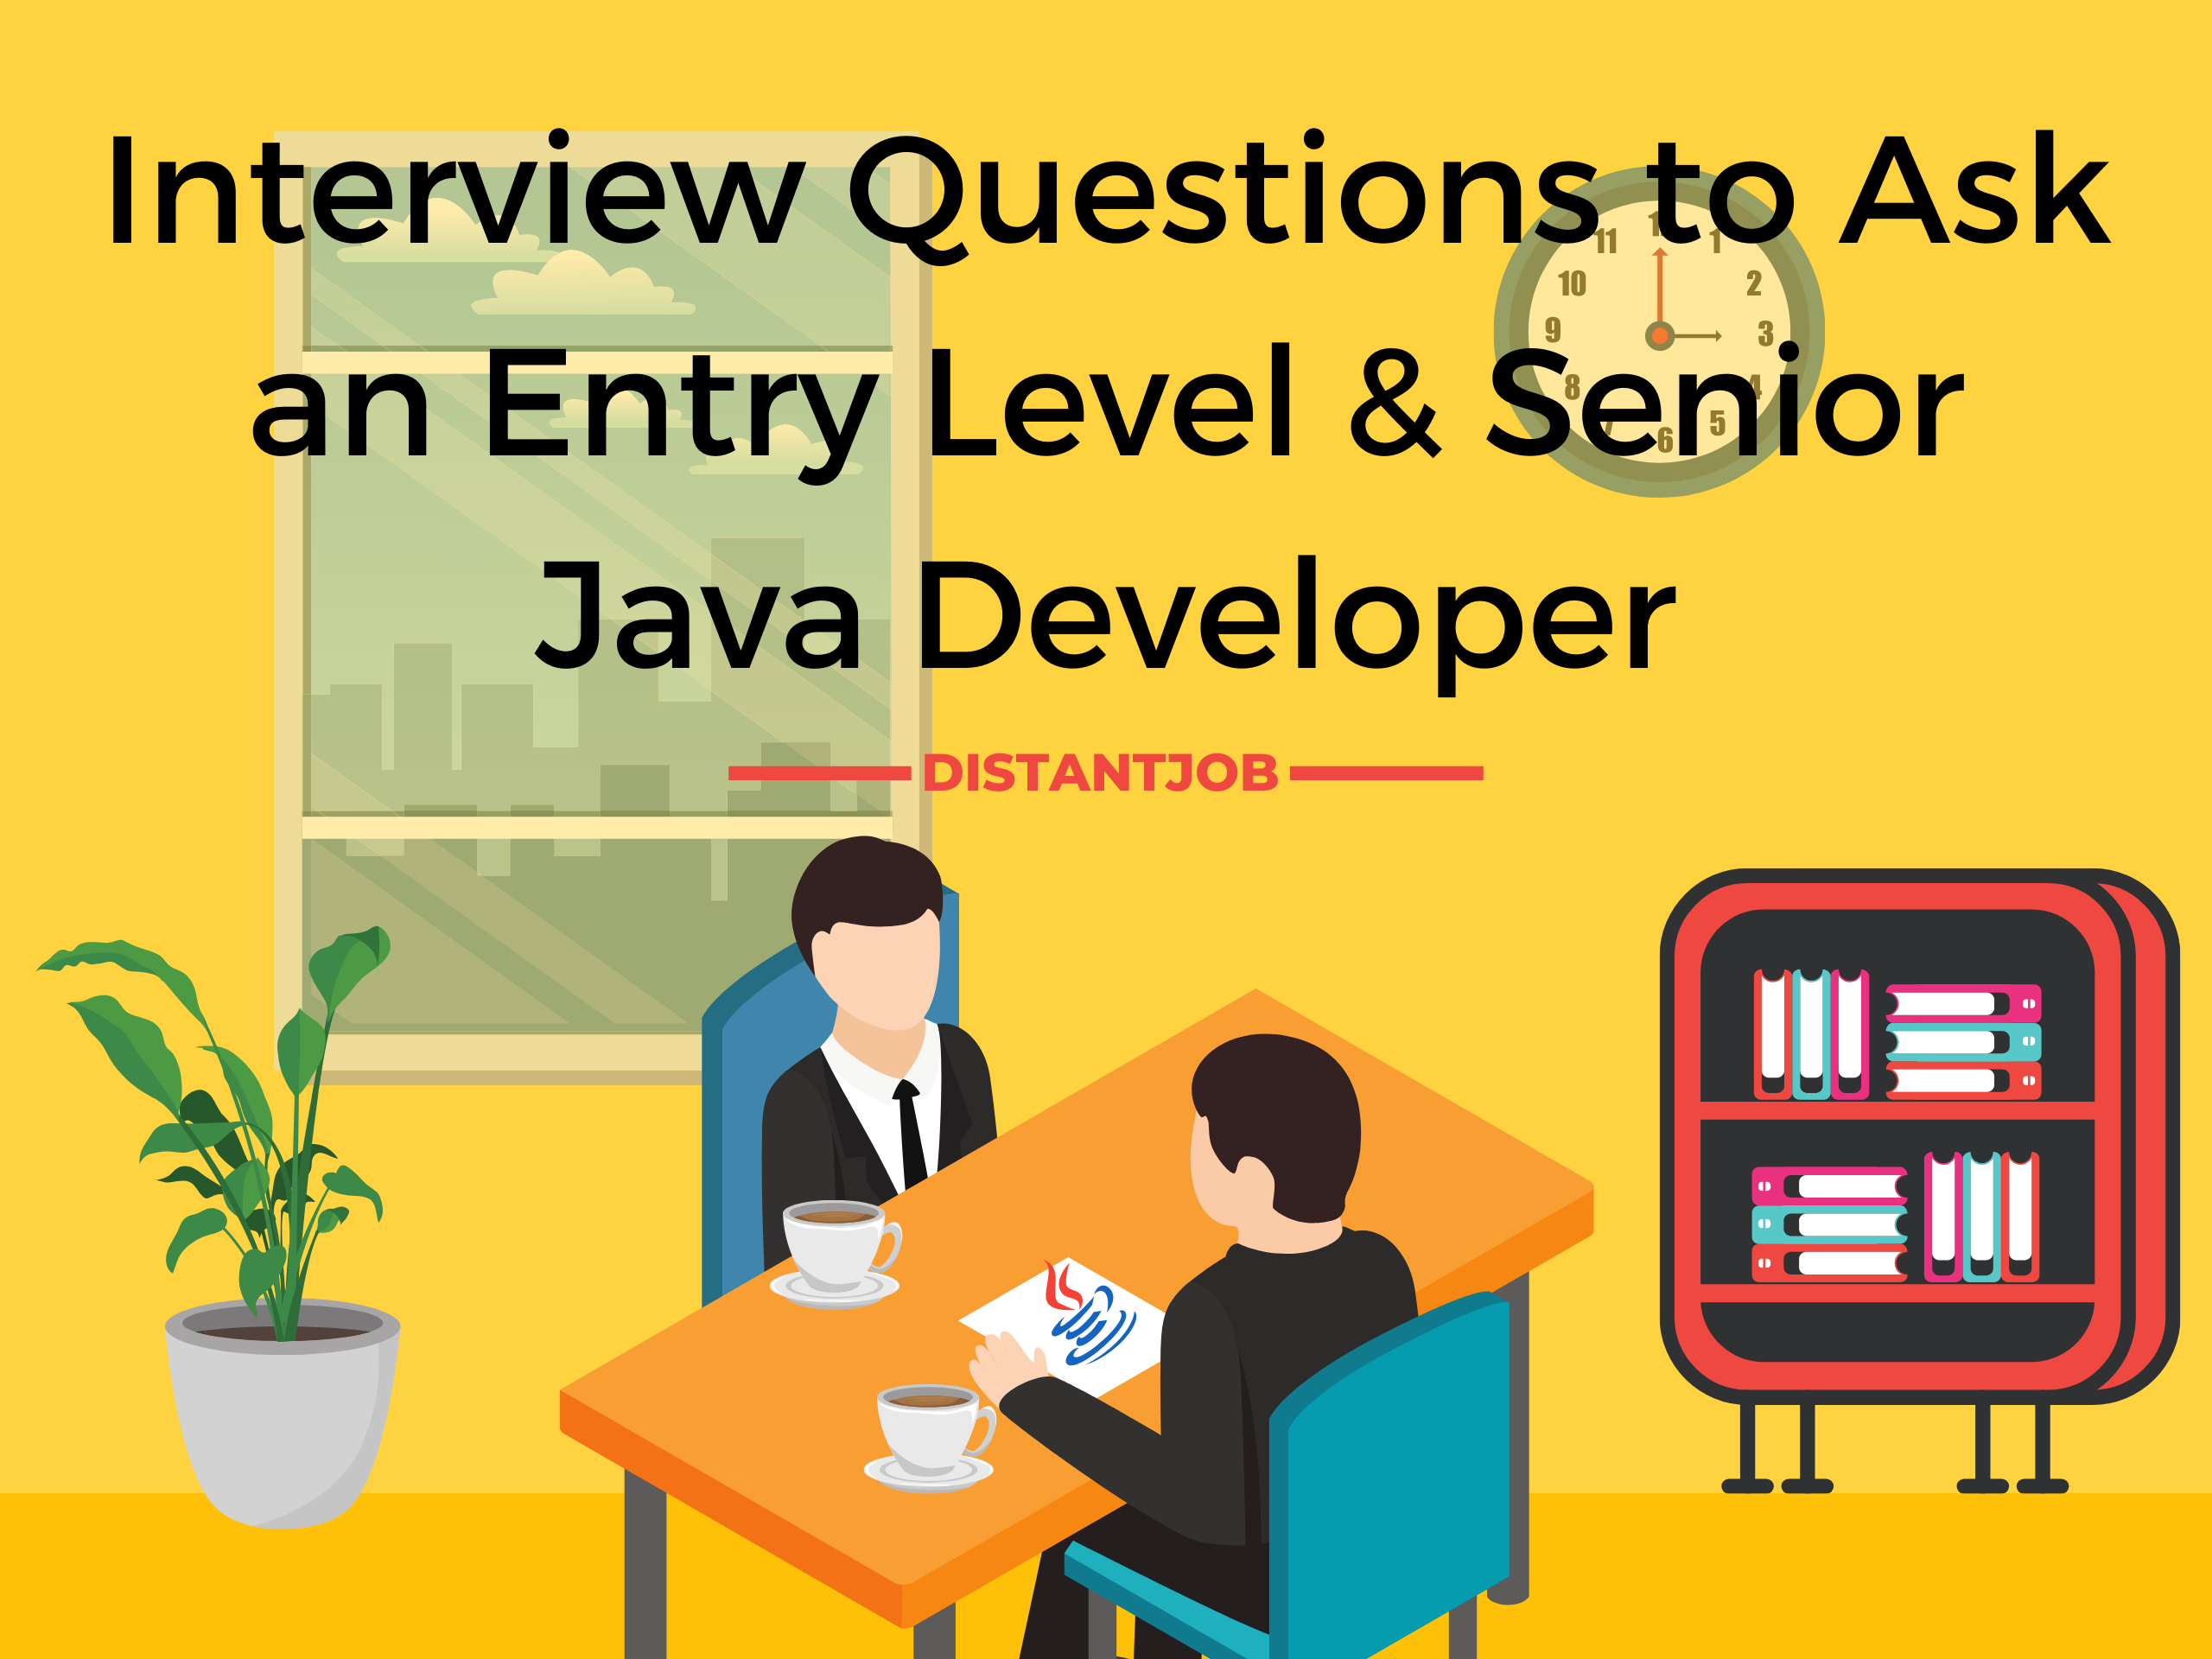 java interview questions